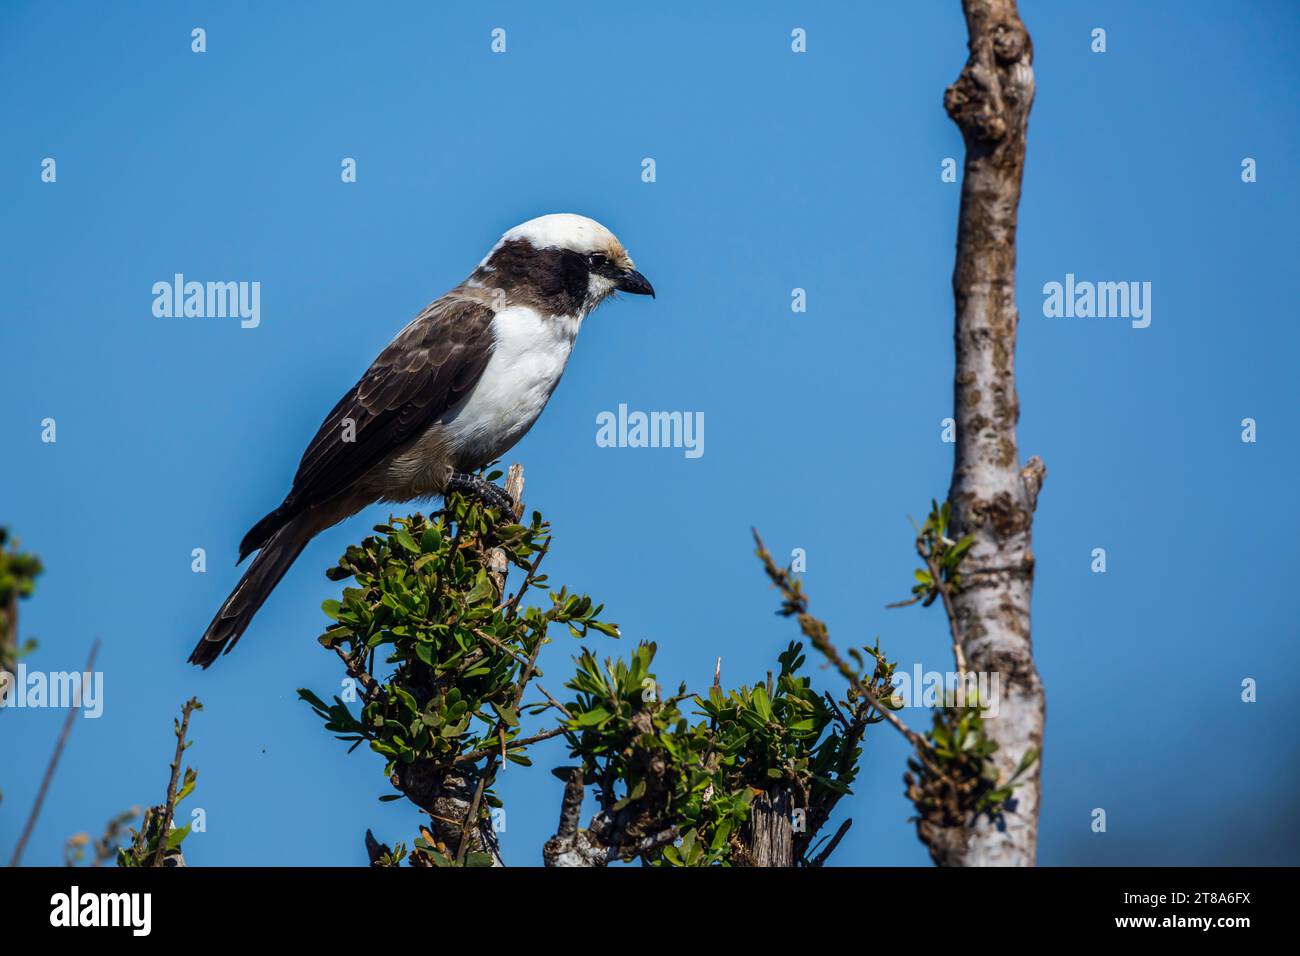 White crowned Shrike standing on a bush isolated in blue sky in Kruger National park, South Africa ; Specie Eurocephalus anguitimens family of Laniida Stock Photo